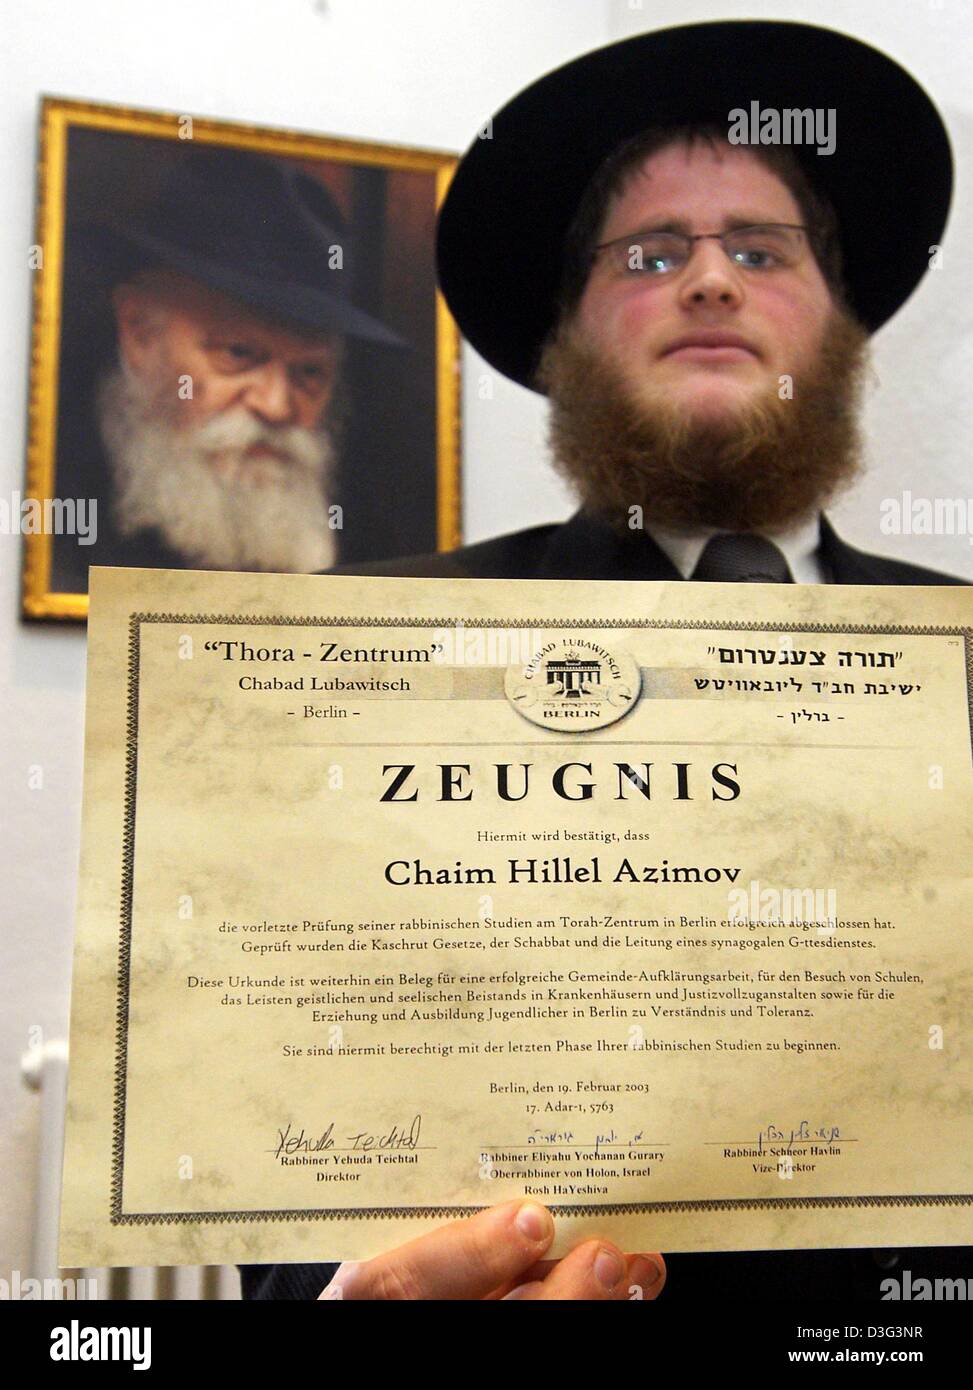 (dpa) - Rabbi student Chaim Hillel Azimov from Jerusalem shows his graduation certificate (Zeugnis) at the 'Chabad Lubavitsh' Jewish Center in Berlin, 19 February 2003. He is one of the ten first rabbi graduates after World War II in Berlin. The organisation 'Chabad Lubavitsh' was founded 150 years ago and is present in Berlin since 1996. Stock Photo